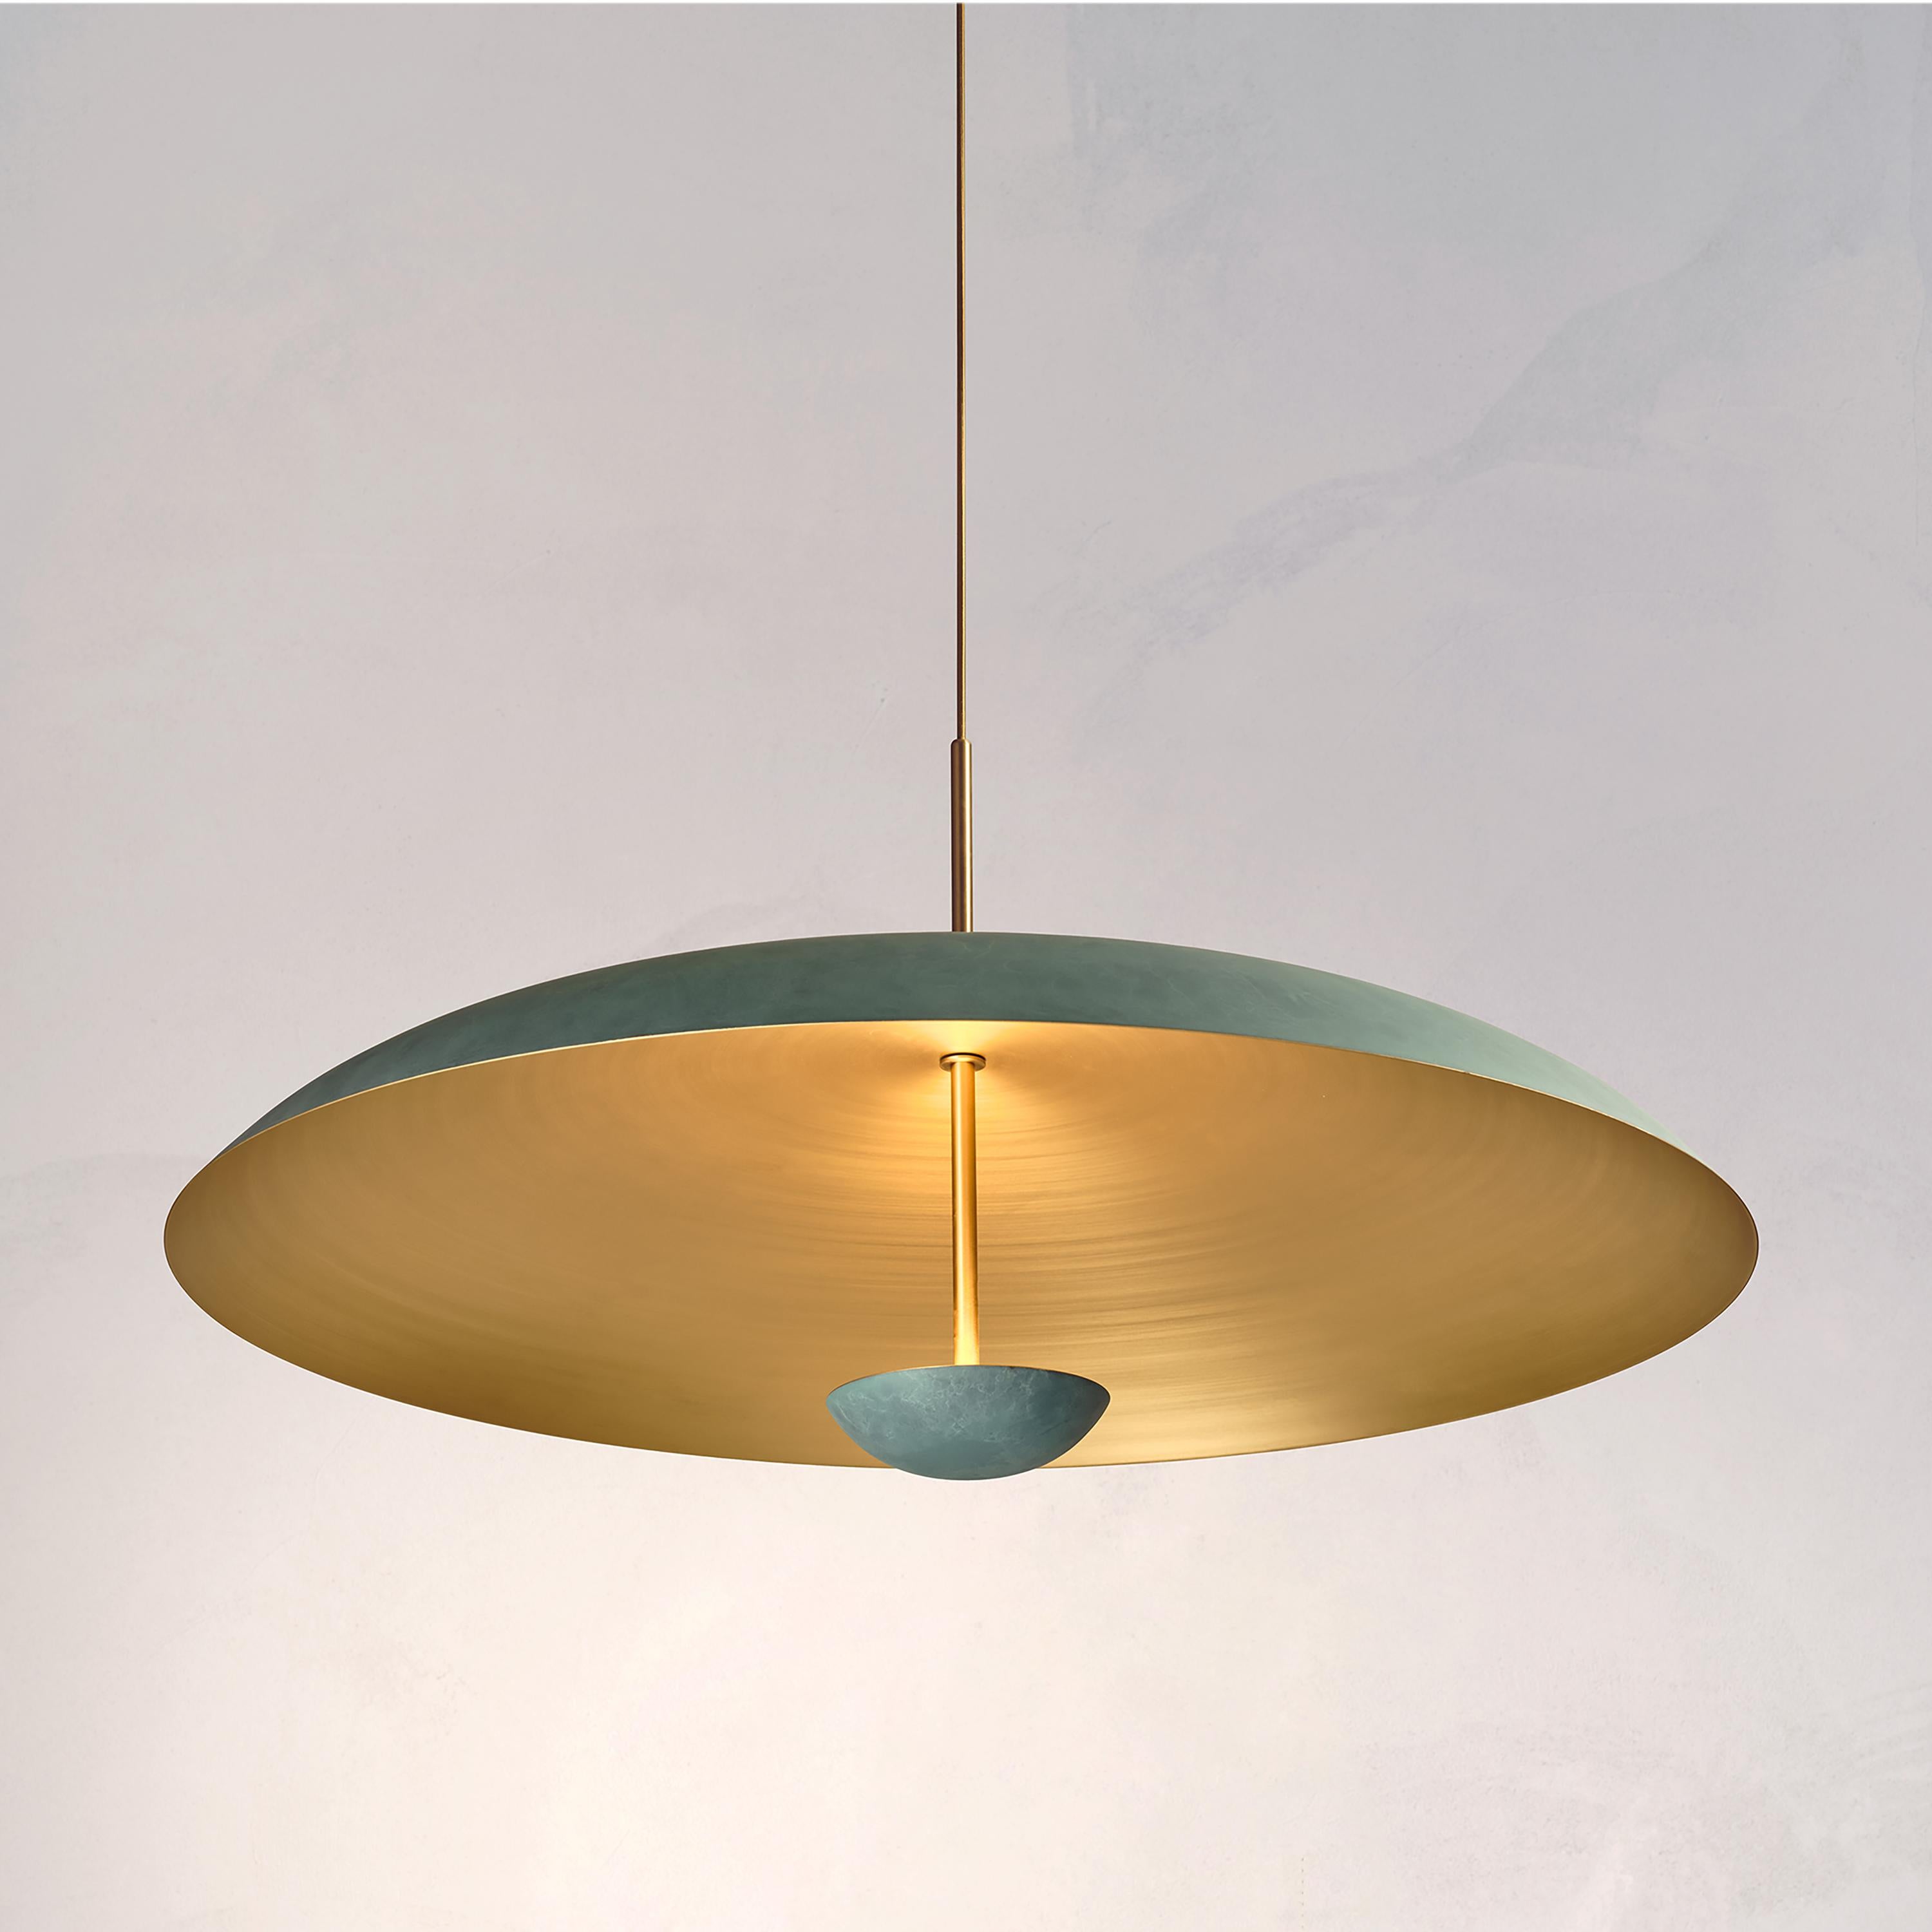 Two finely hand-spun brass plates make up this pendant light, finished in a verdigris patina to create this unique appearance. The light is projected into the shade and reflects out, illuminating without creating a glare.
 
This light fixture is